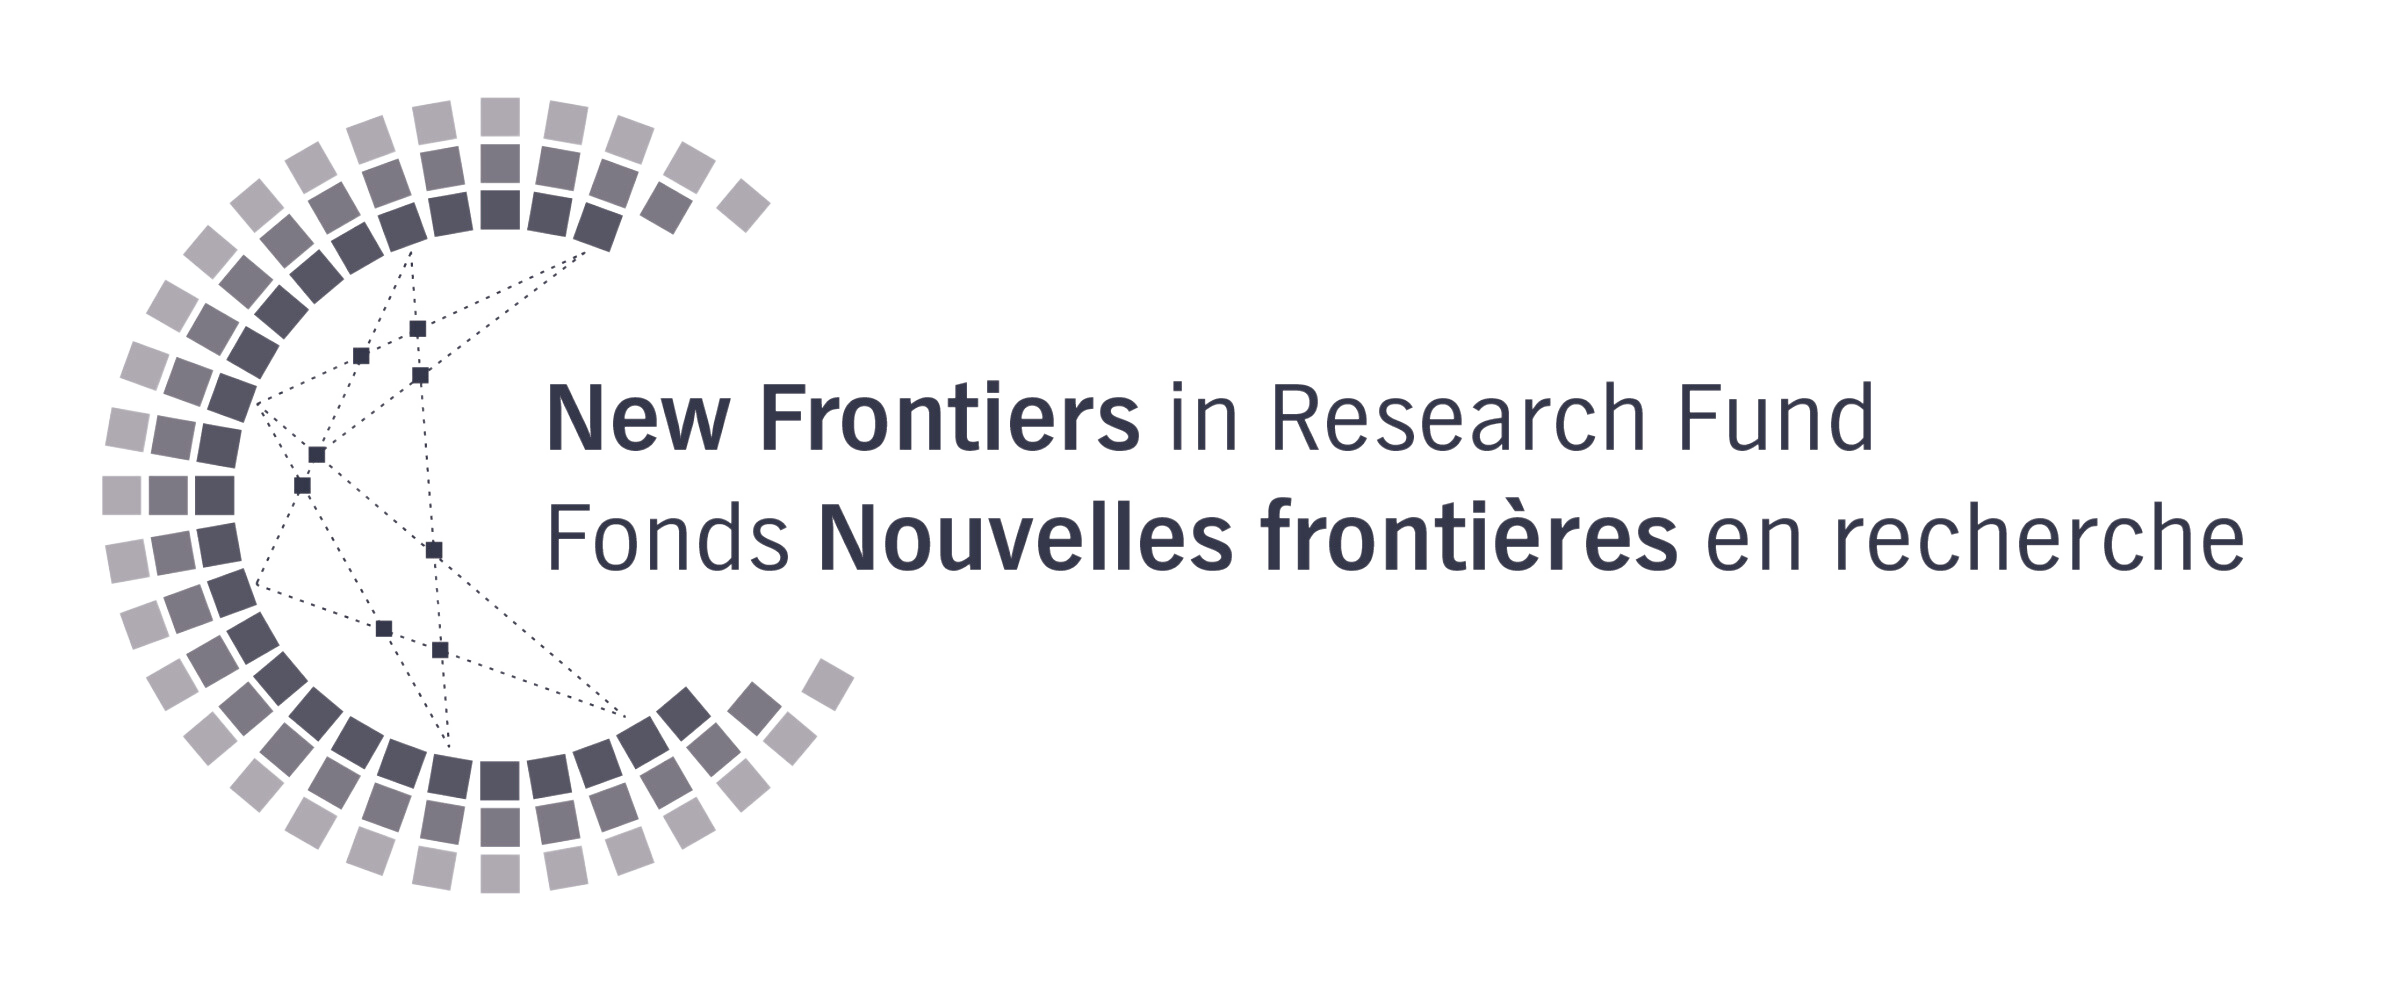 new-frontiers-research-fund.png